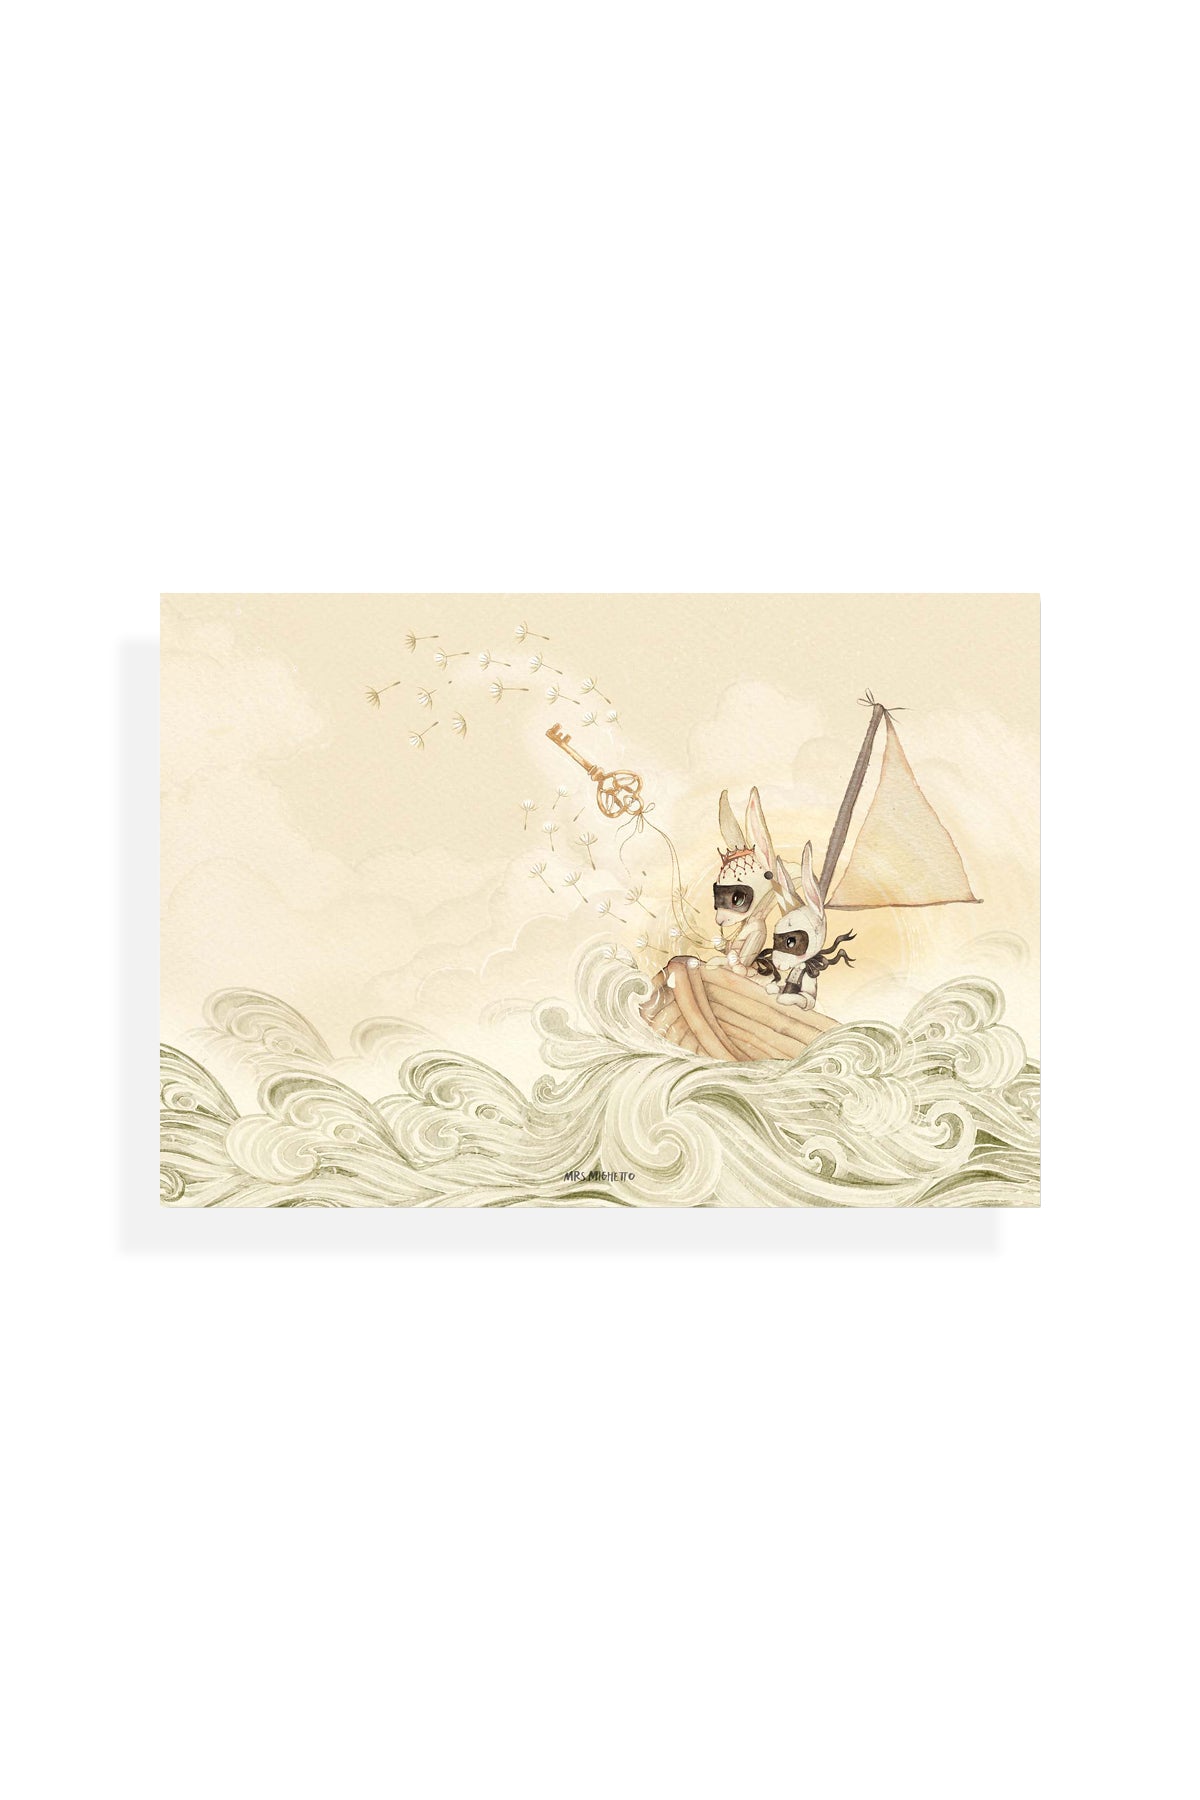 Mrs. Mighetto The Queen's Boat Poster - 30 x 21cm